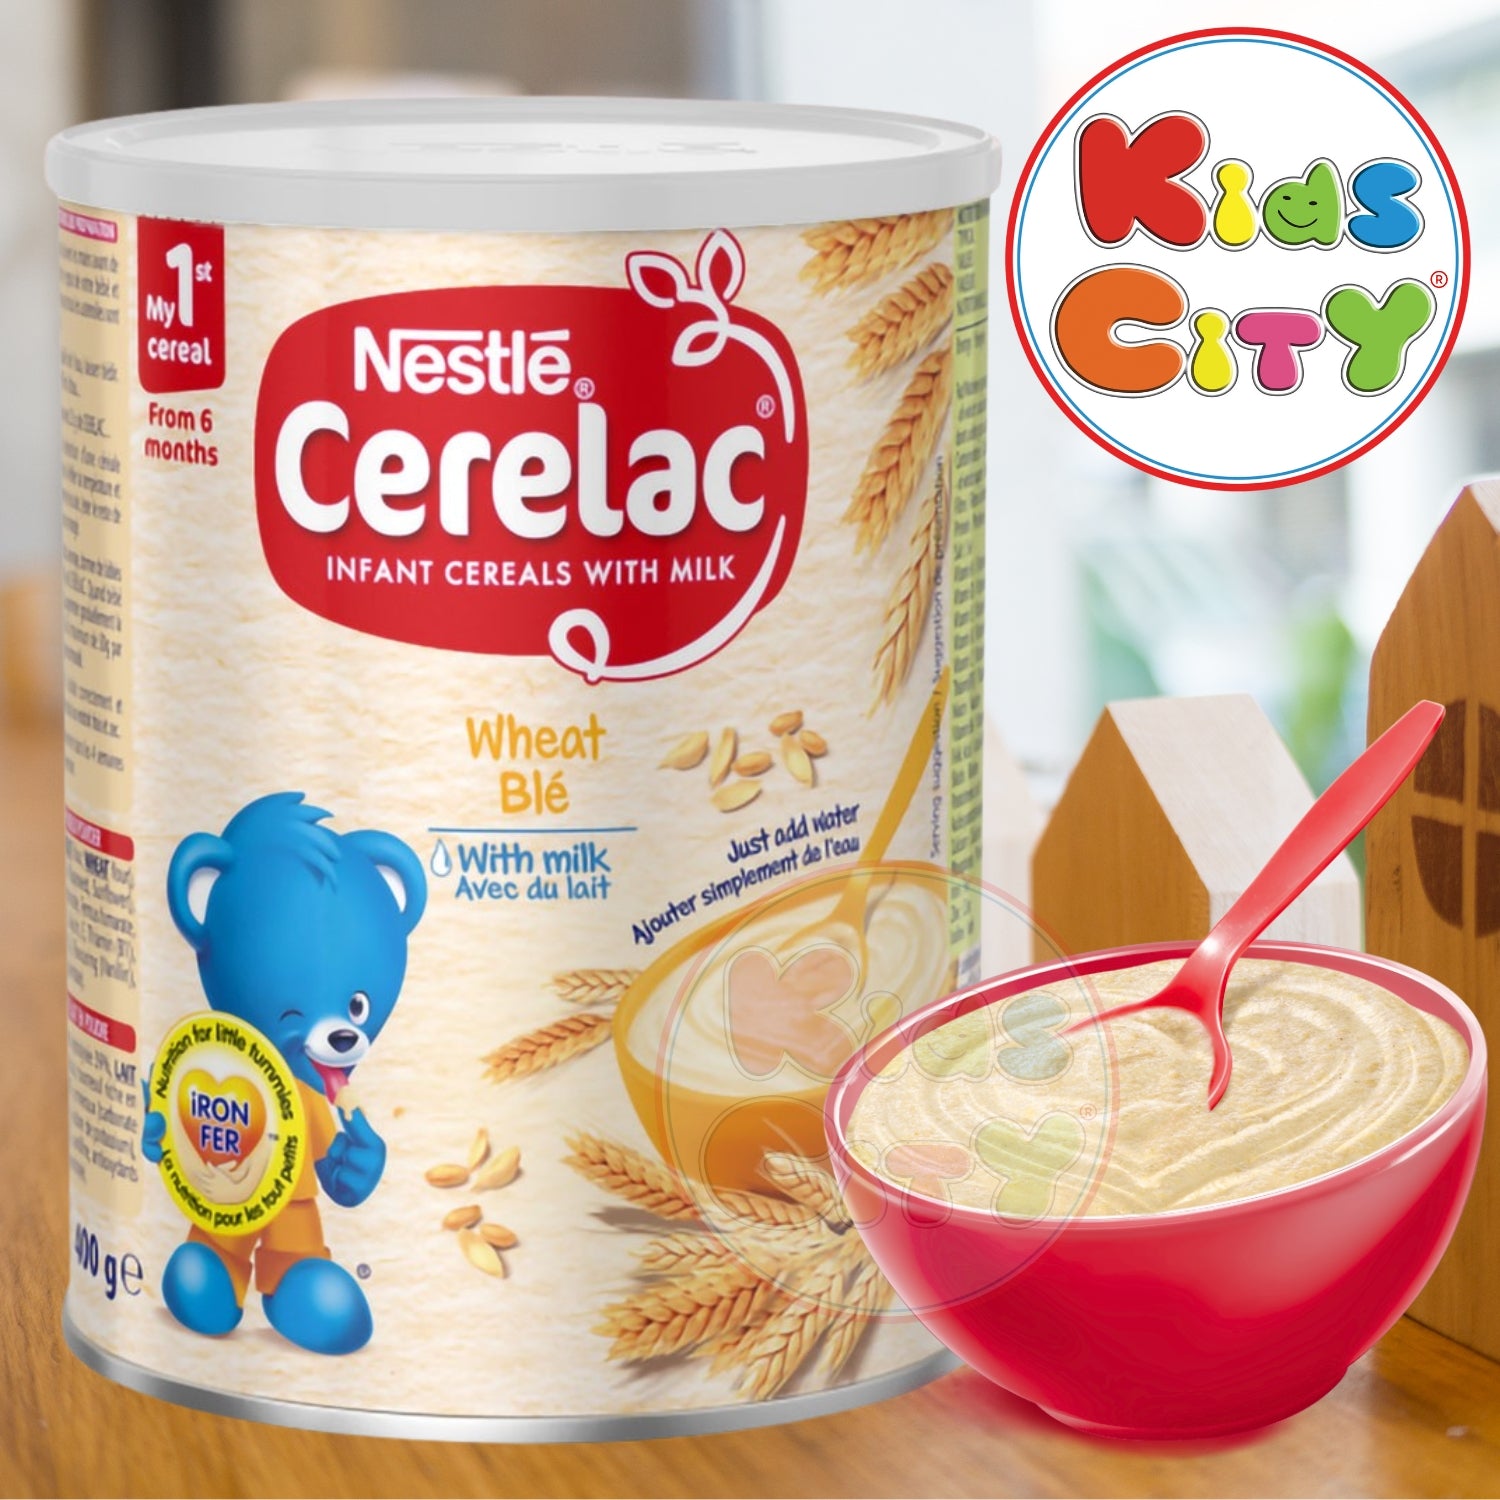 Nestle Cerelac Wheat (Ble) with Milk - 400g (Imported)